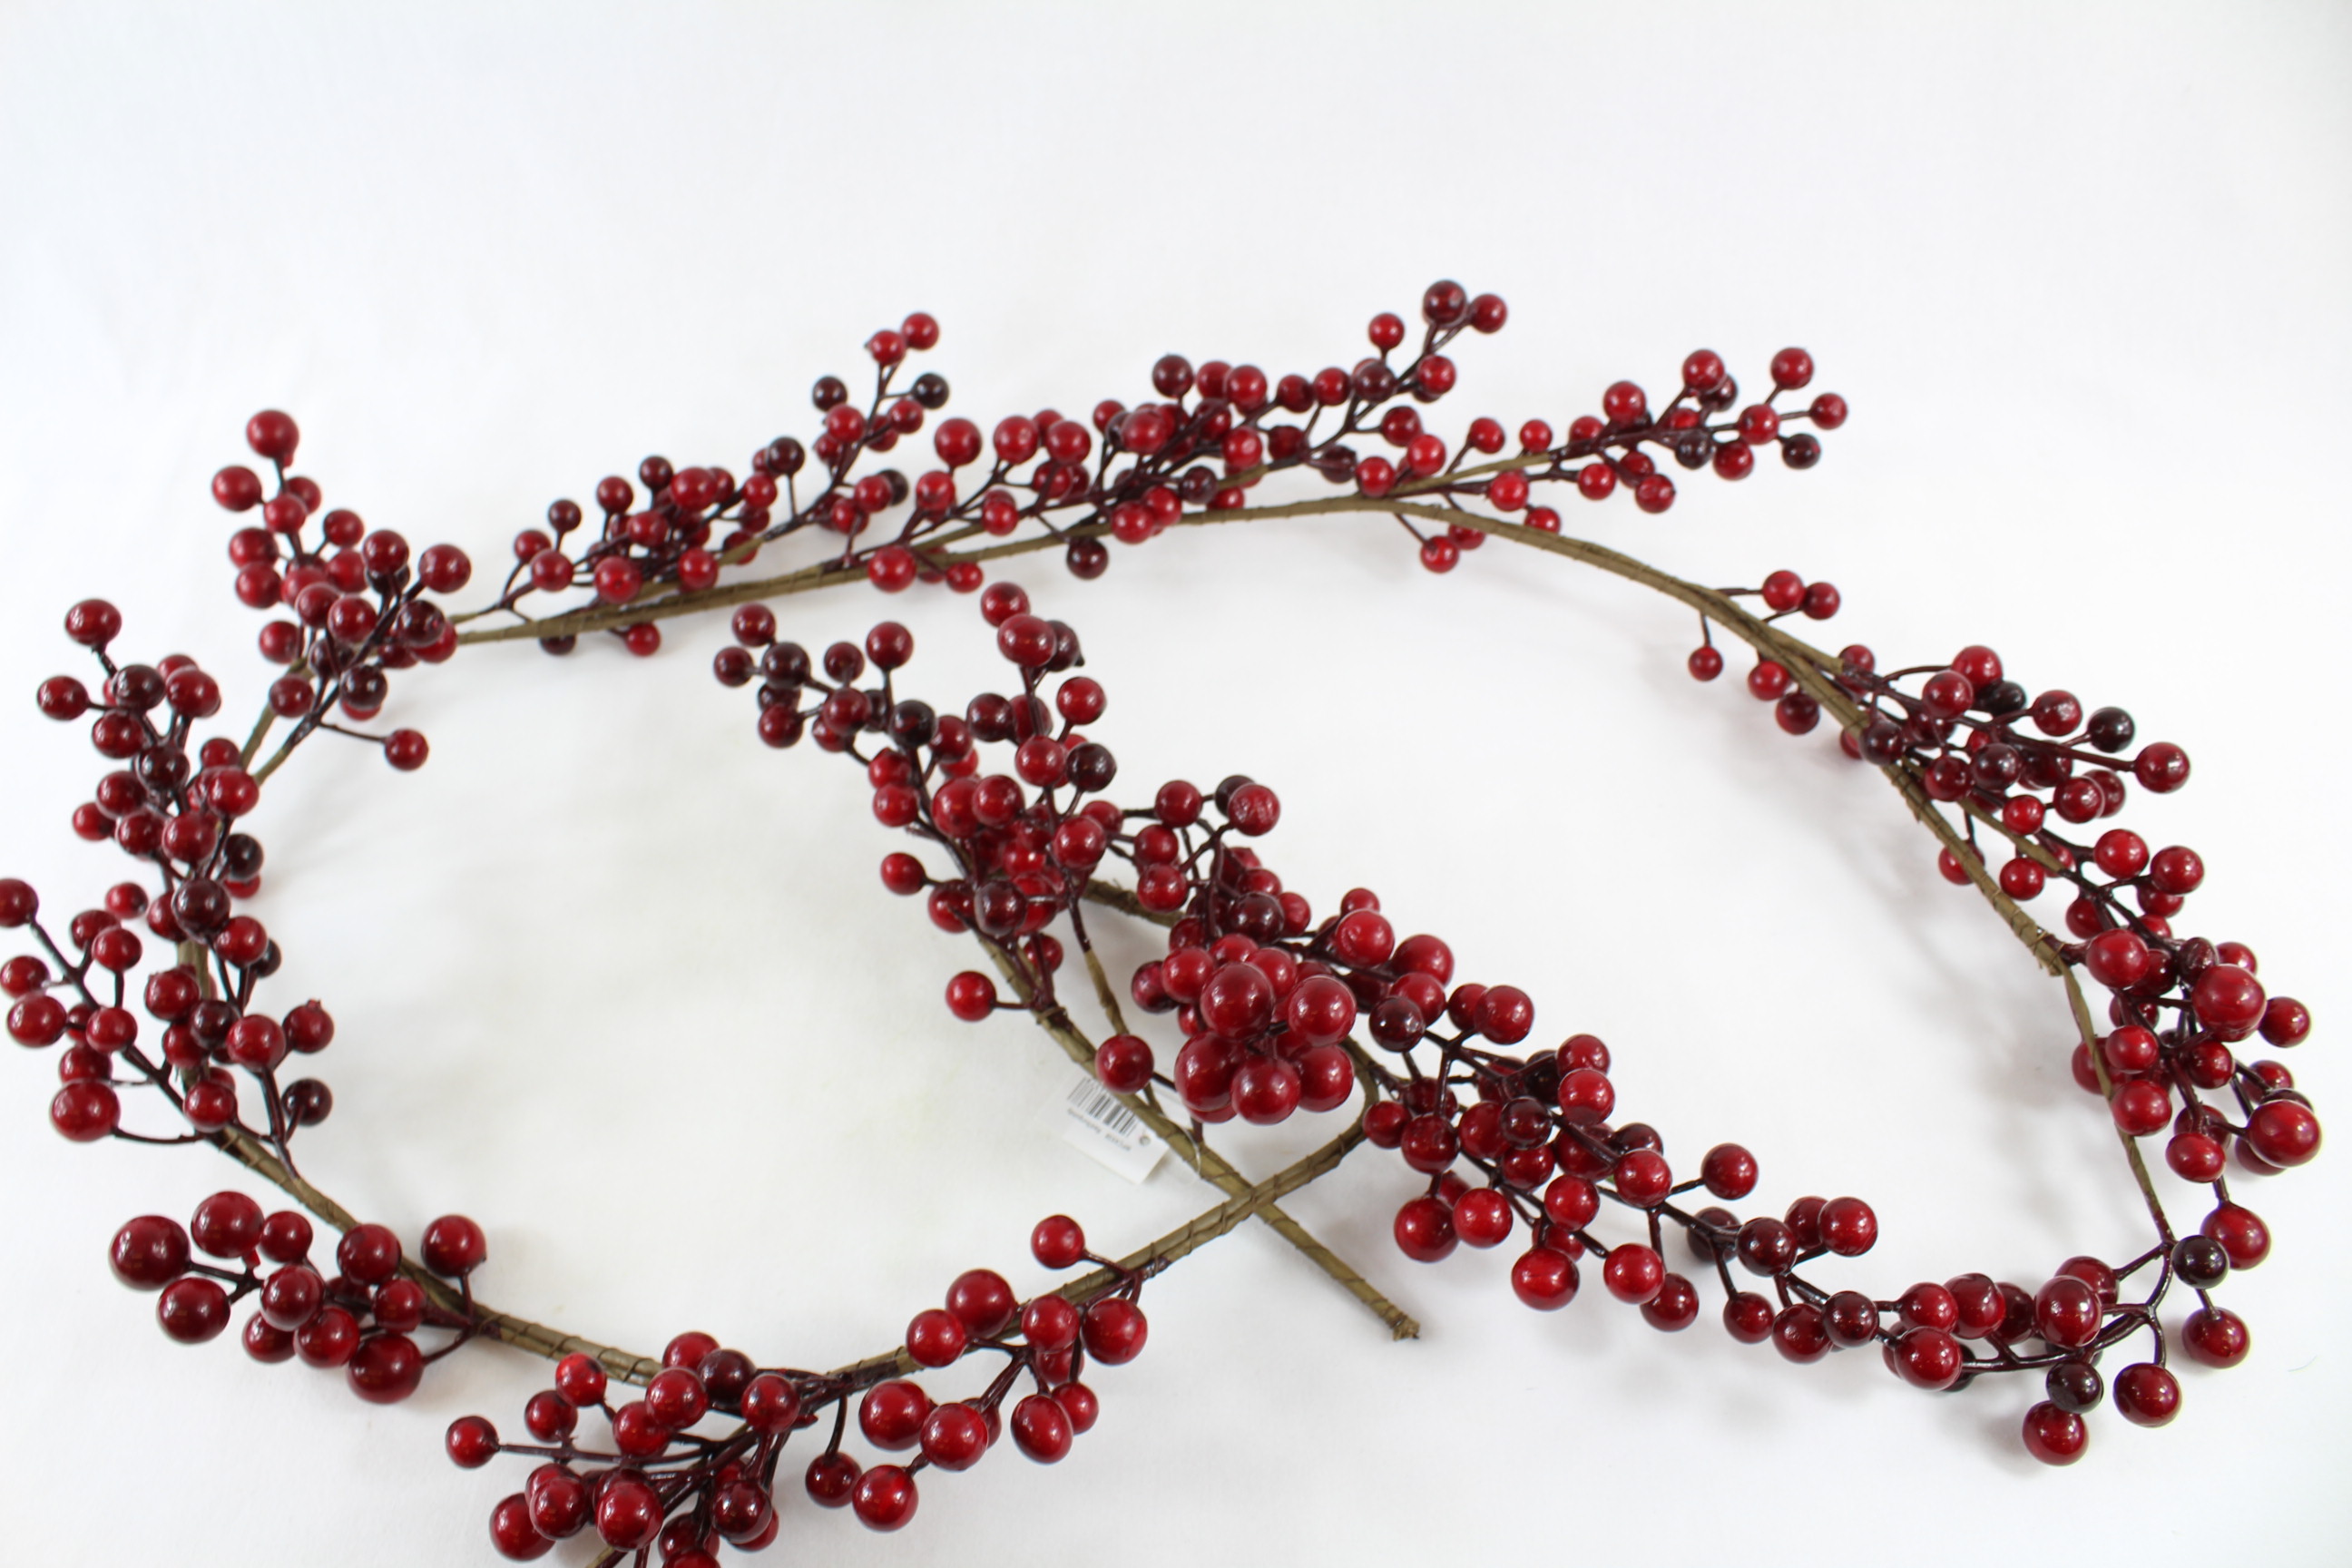 5Foot Garland Of Shiny Red and Burgundy Berries and Rosehips